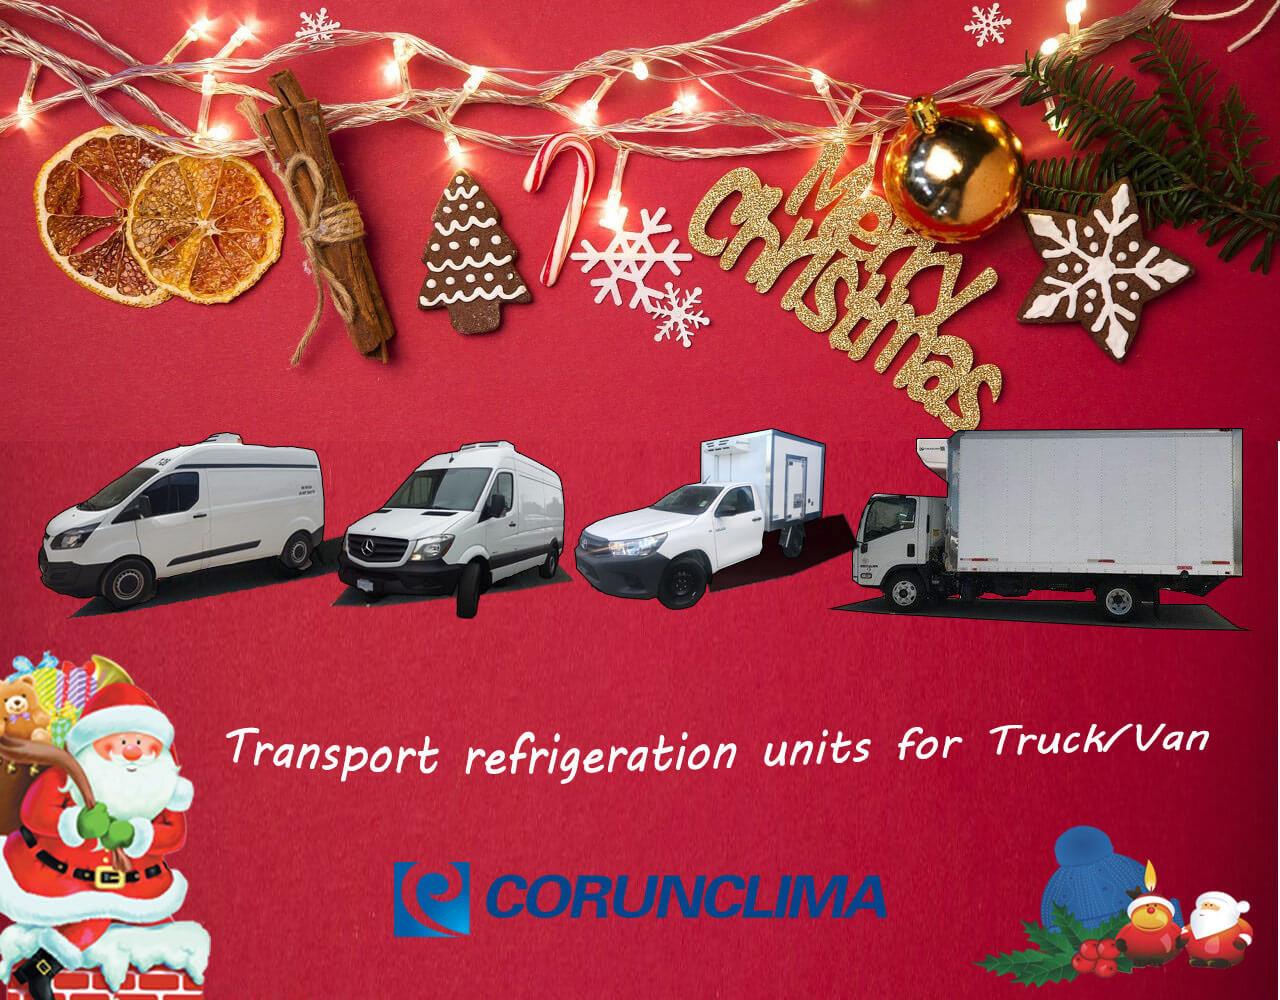 merry christmas from corunclima